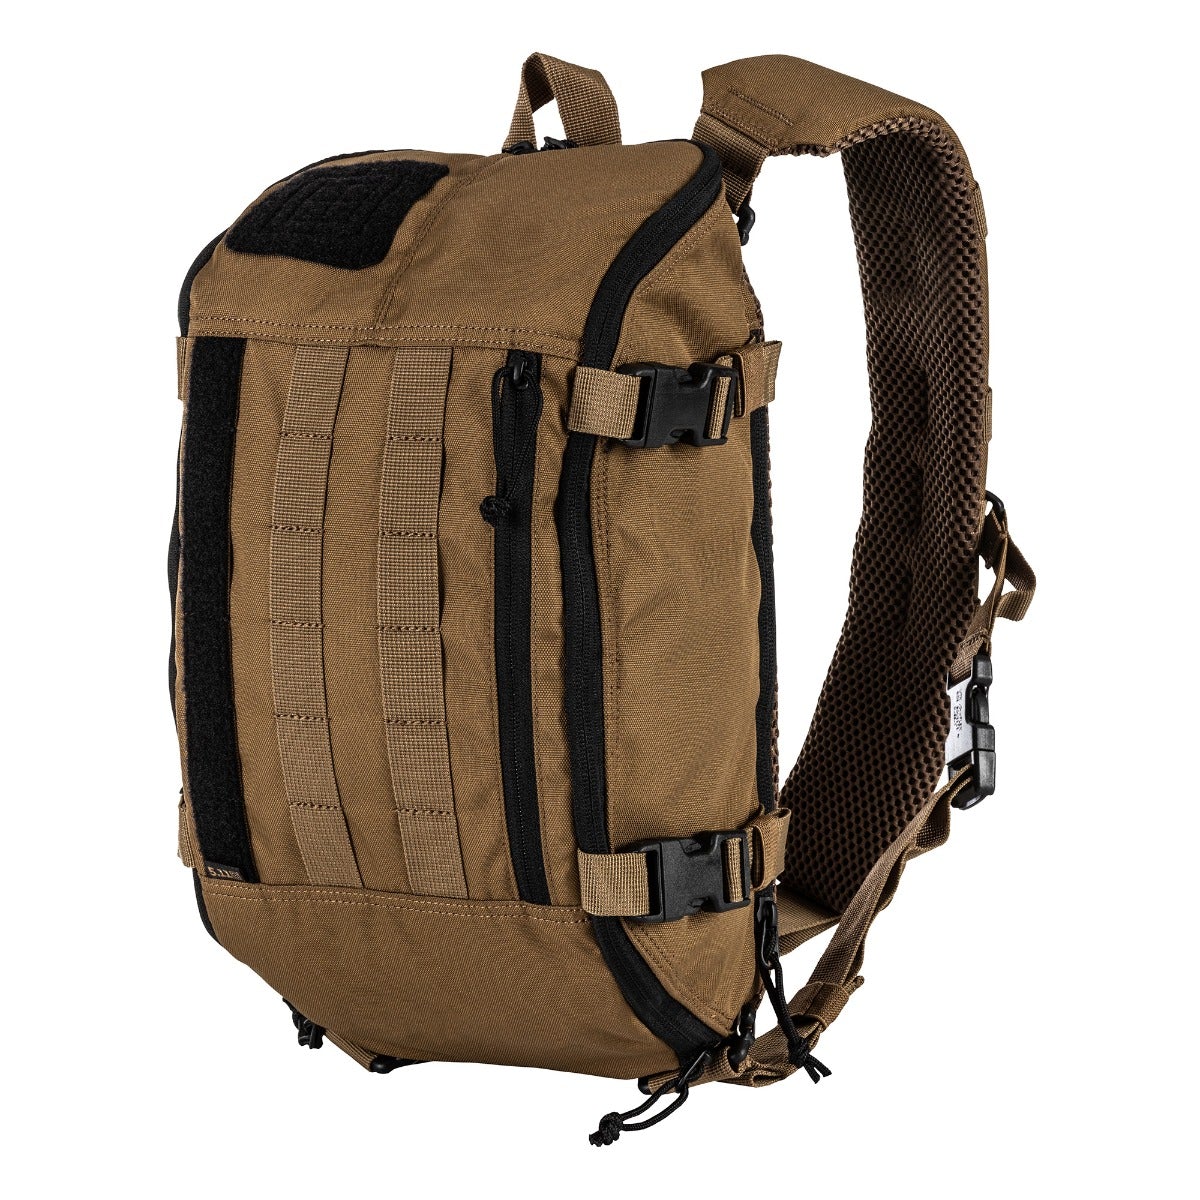 5.11 Tactical Rapid Sling Pack 10L Bags, Packs and Cases 5.11 Tactical Kangaroo Tactical Gear Supplier Tactical Distributors Australia